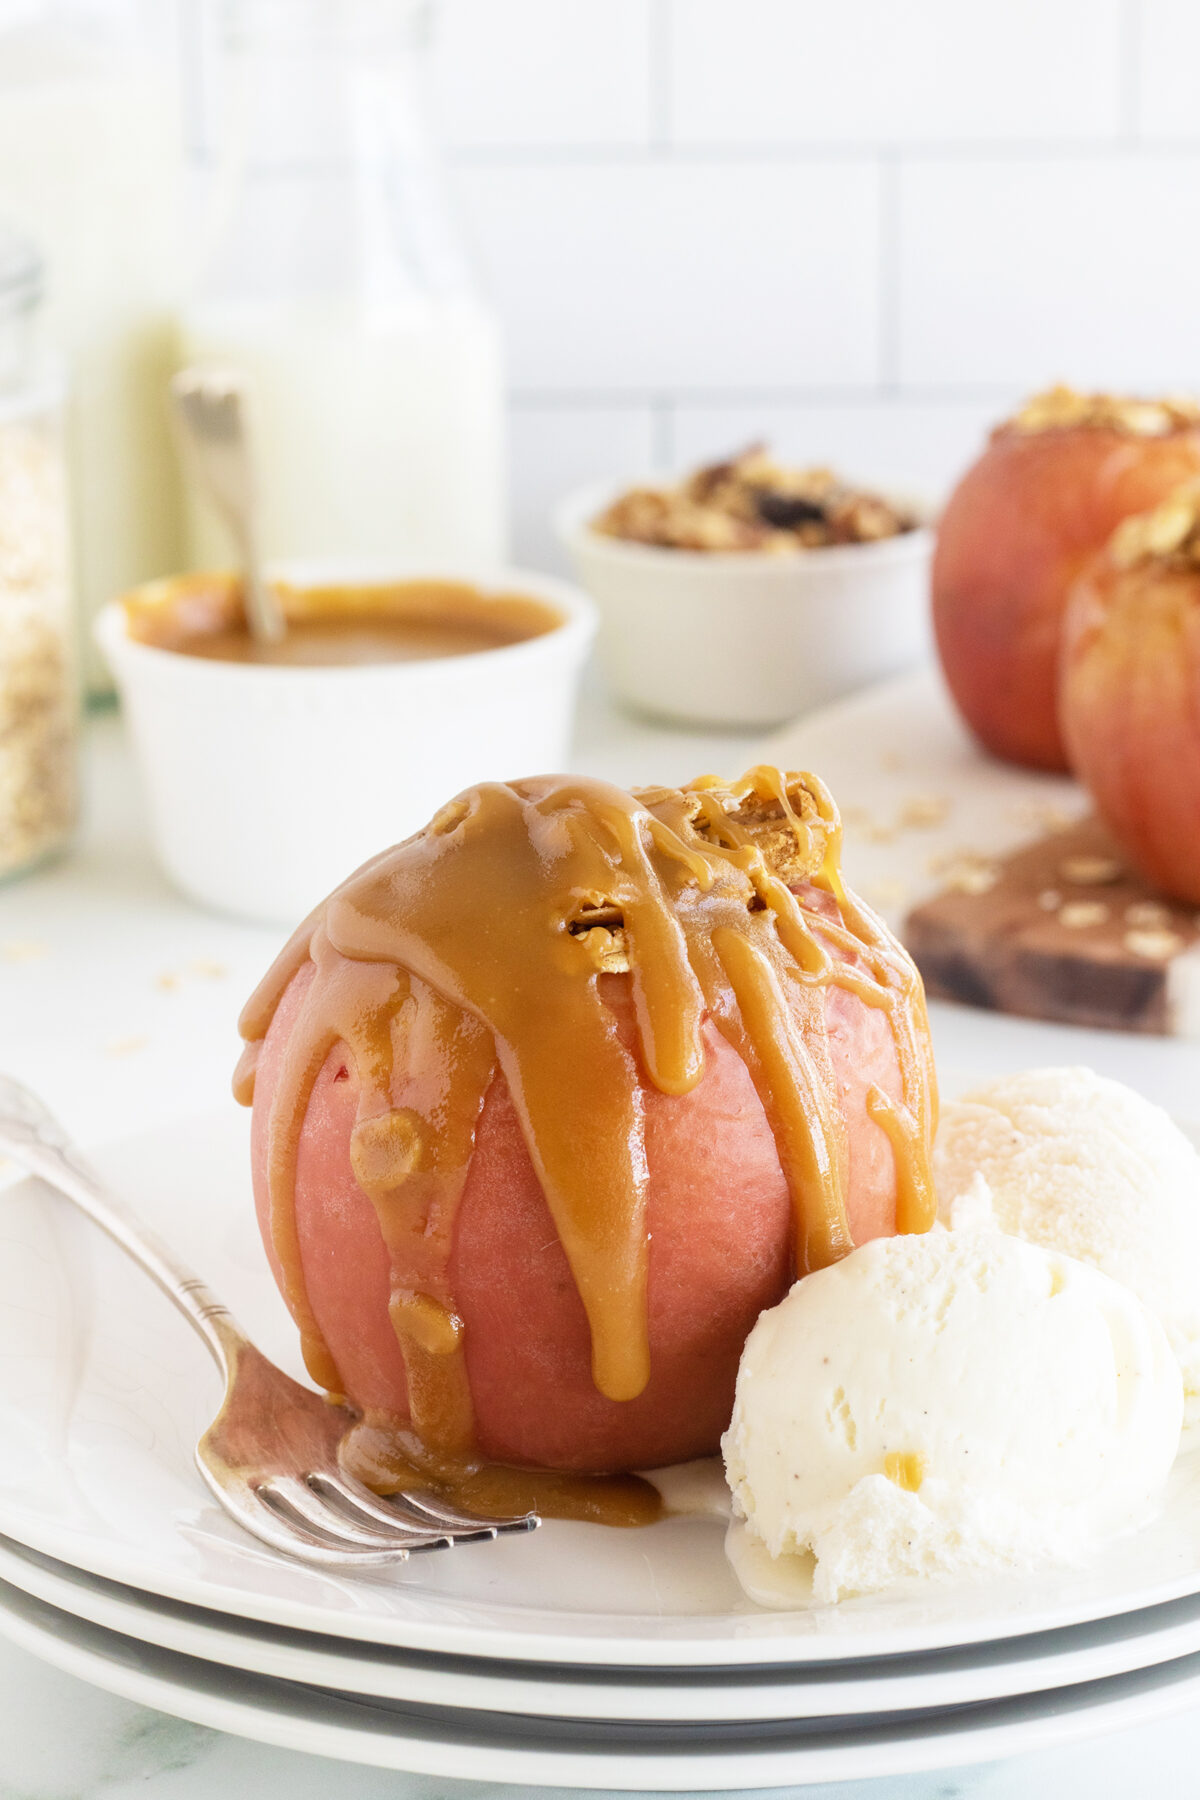 Baked apple with caramel drizzled on top with ice cream